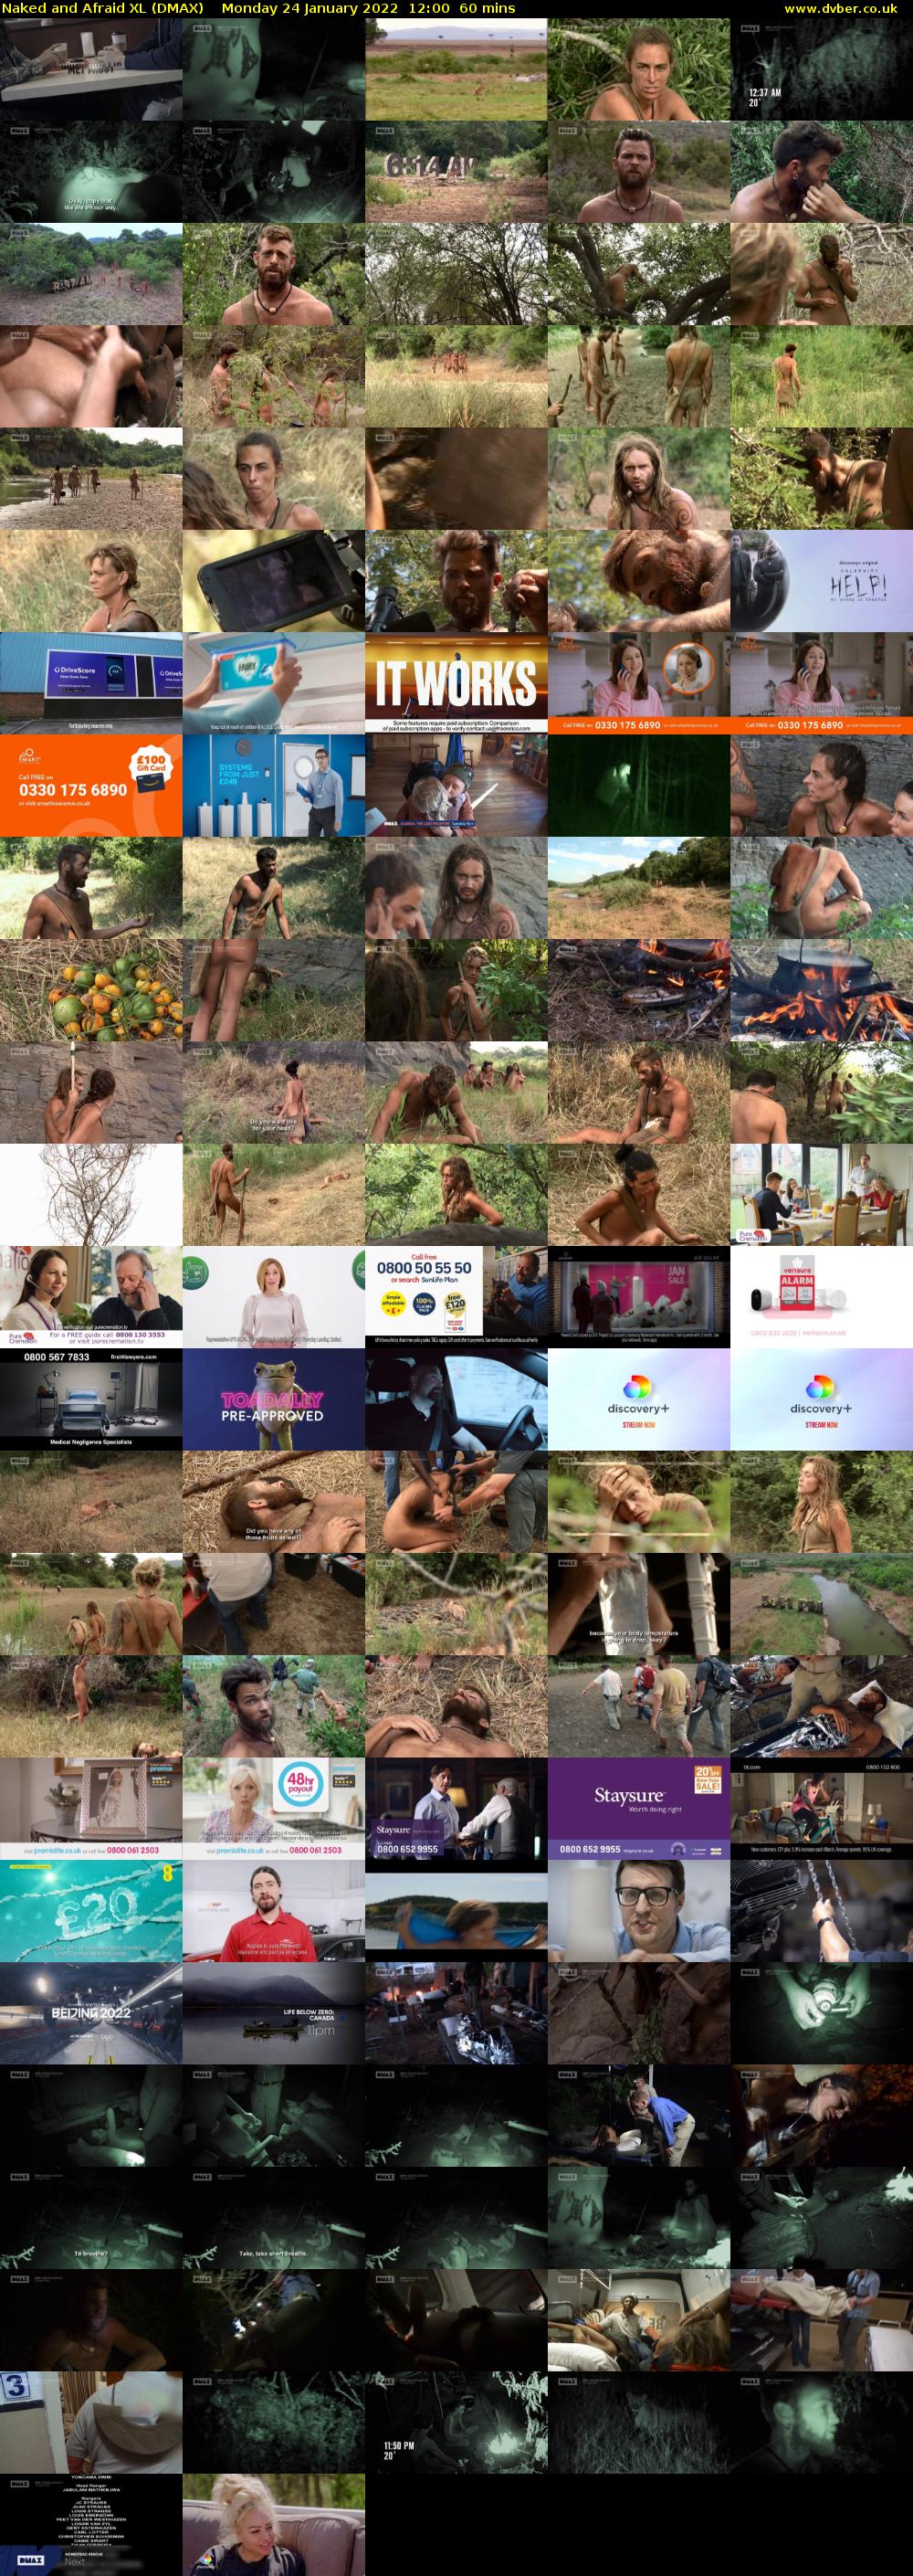 Naked and Afraid XL (DMAX) Monday 24 January 2022 12:00 - 13:00